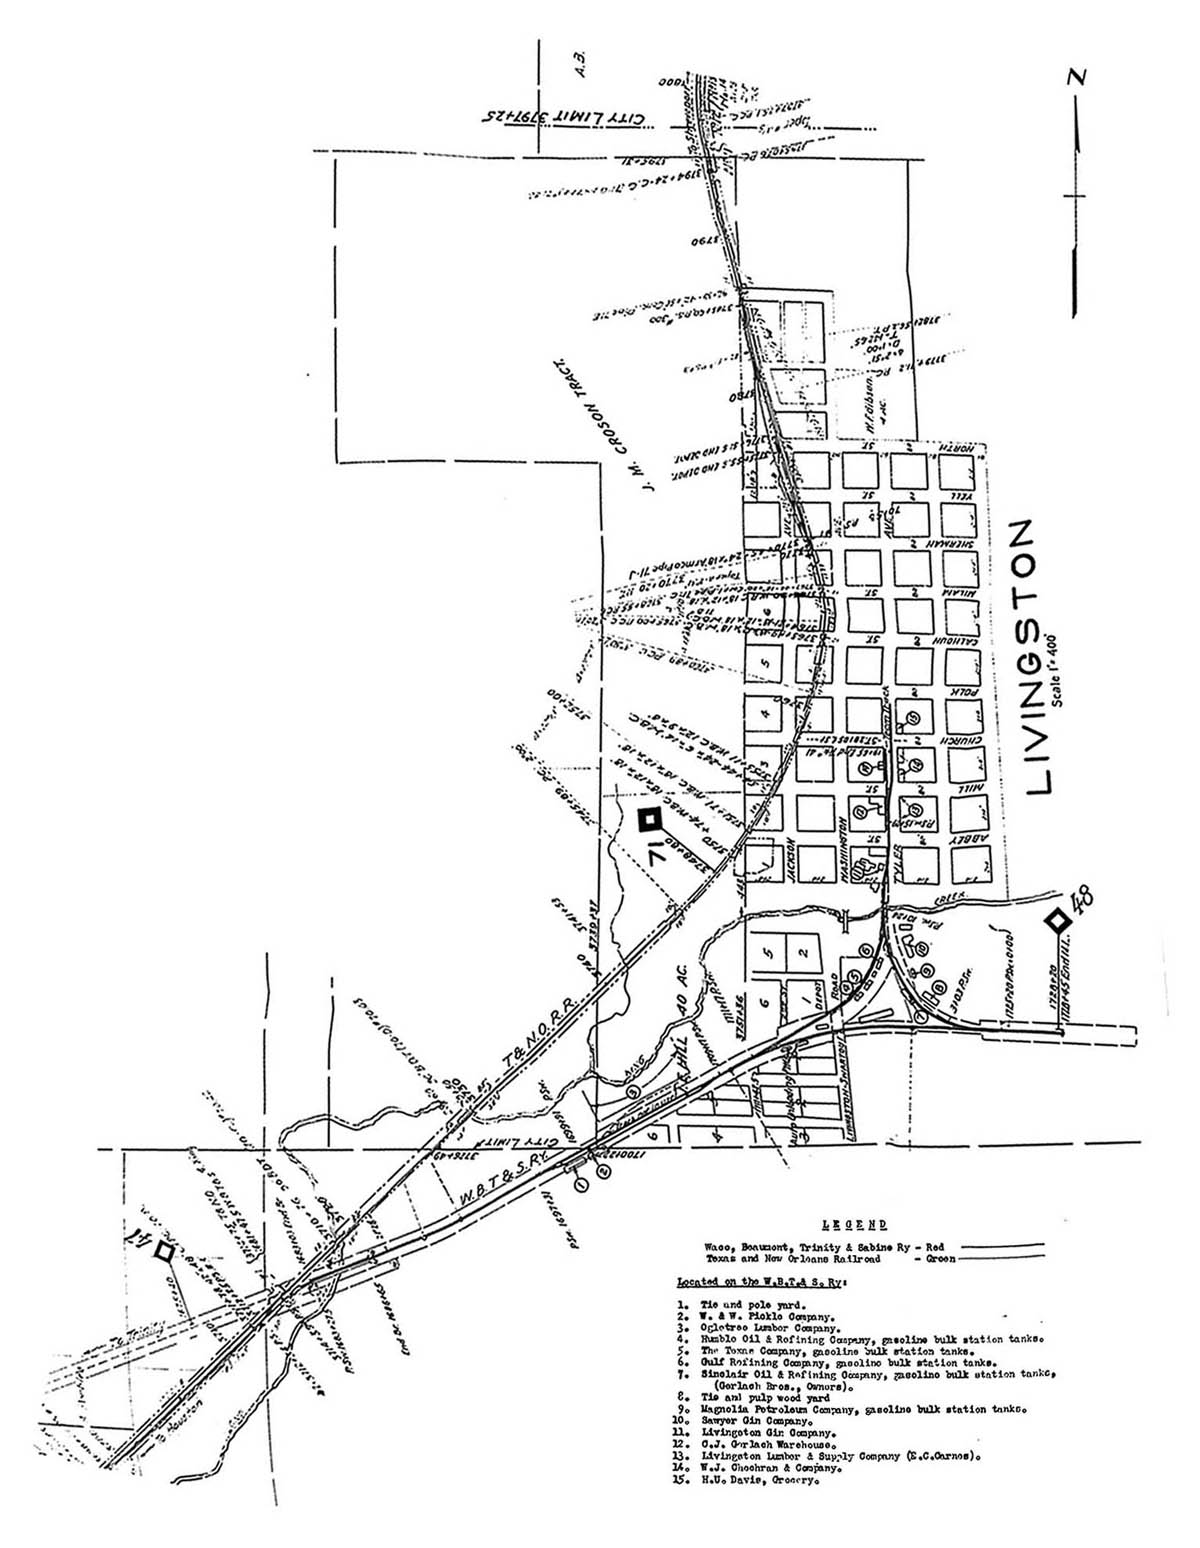 Waco, Beaumont, Trinity & Sabine Railway Company (Tex.), Map Showing Station Layout at Livingston, Texas in 1940.